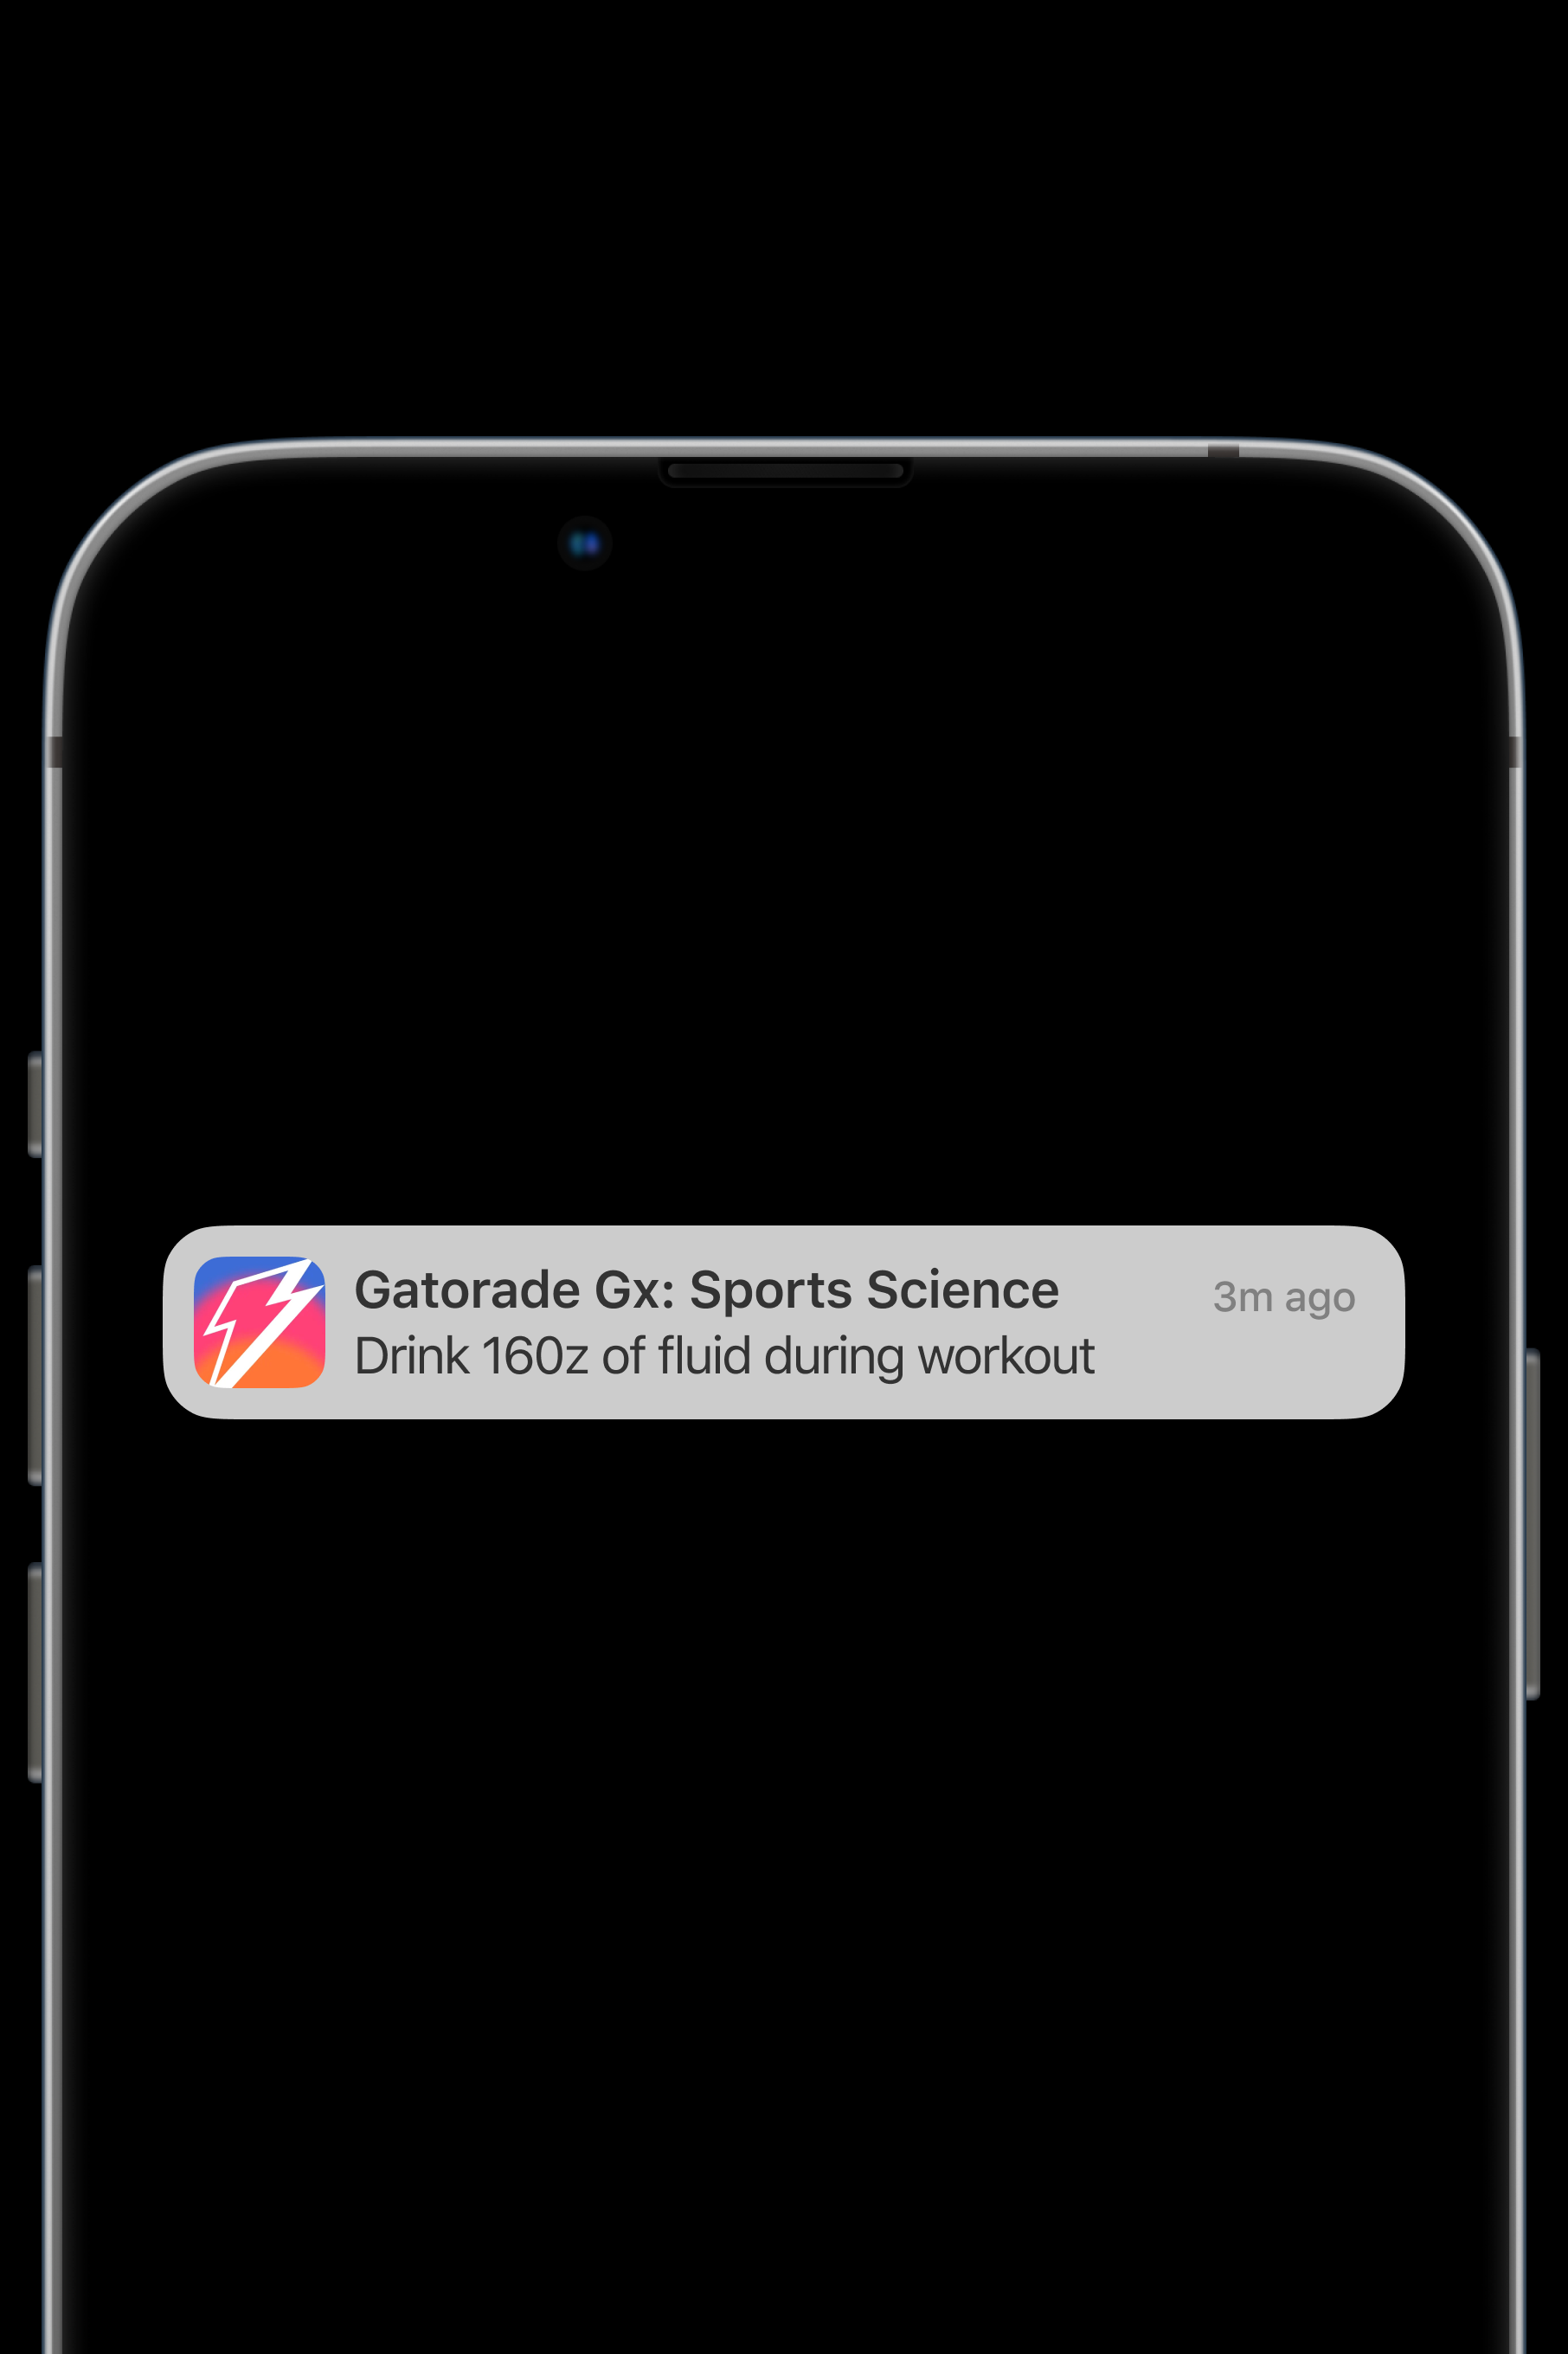 Notification on a mobile phone from the Gx app: "Drink 16 oz of fluid during workout"